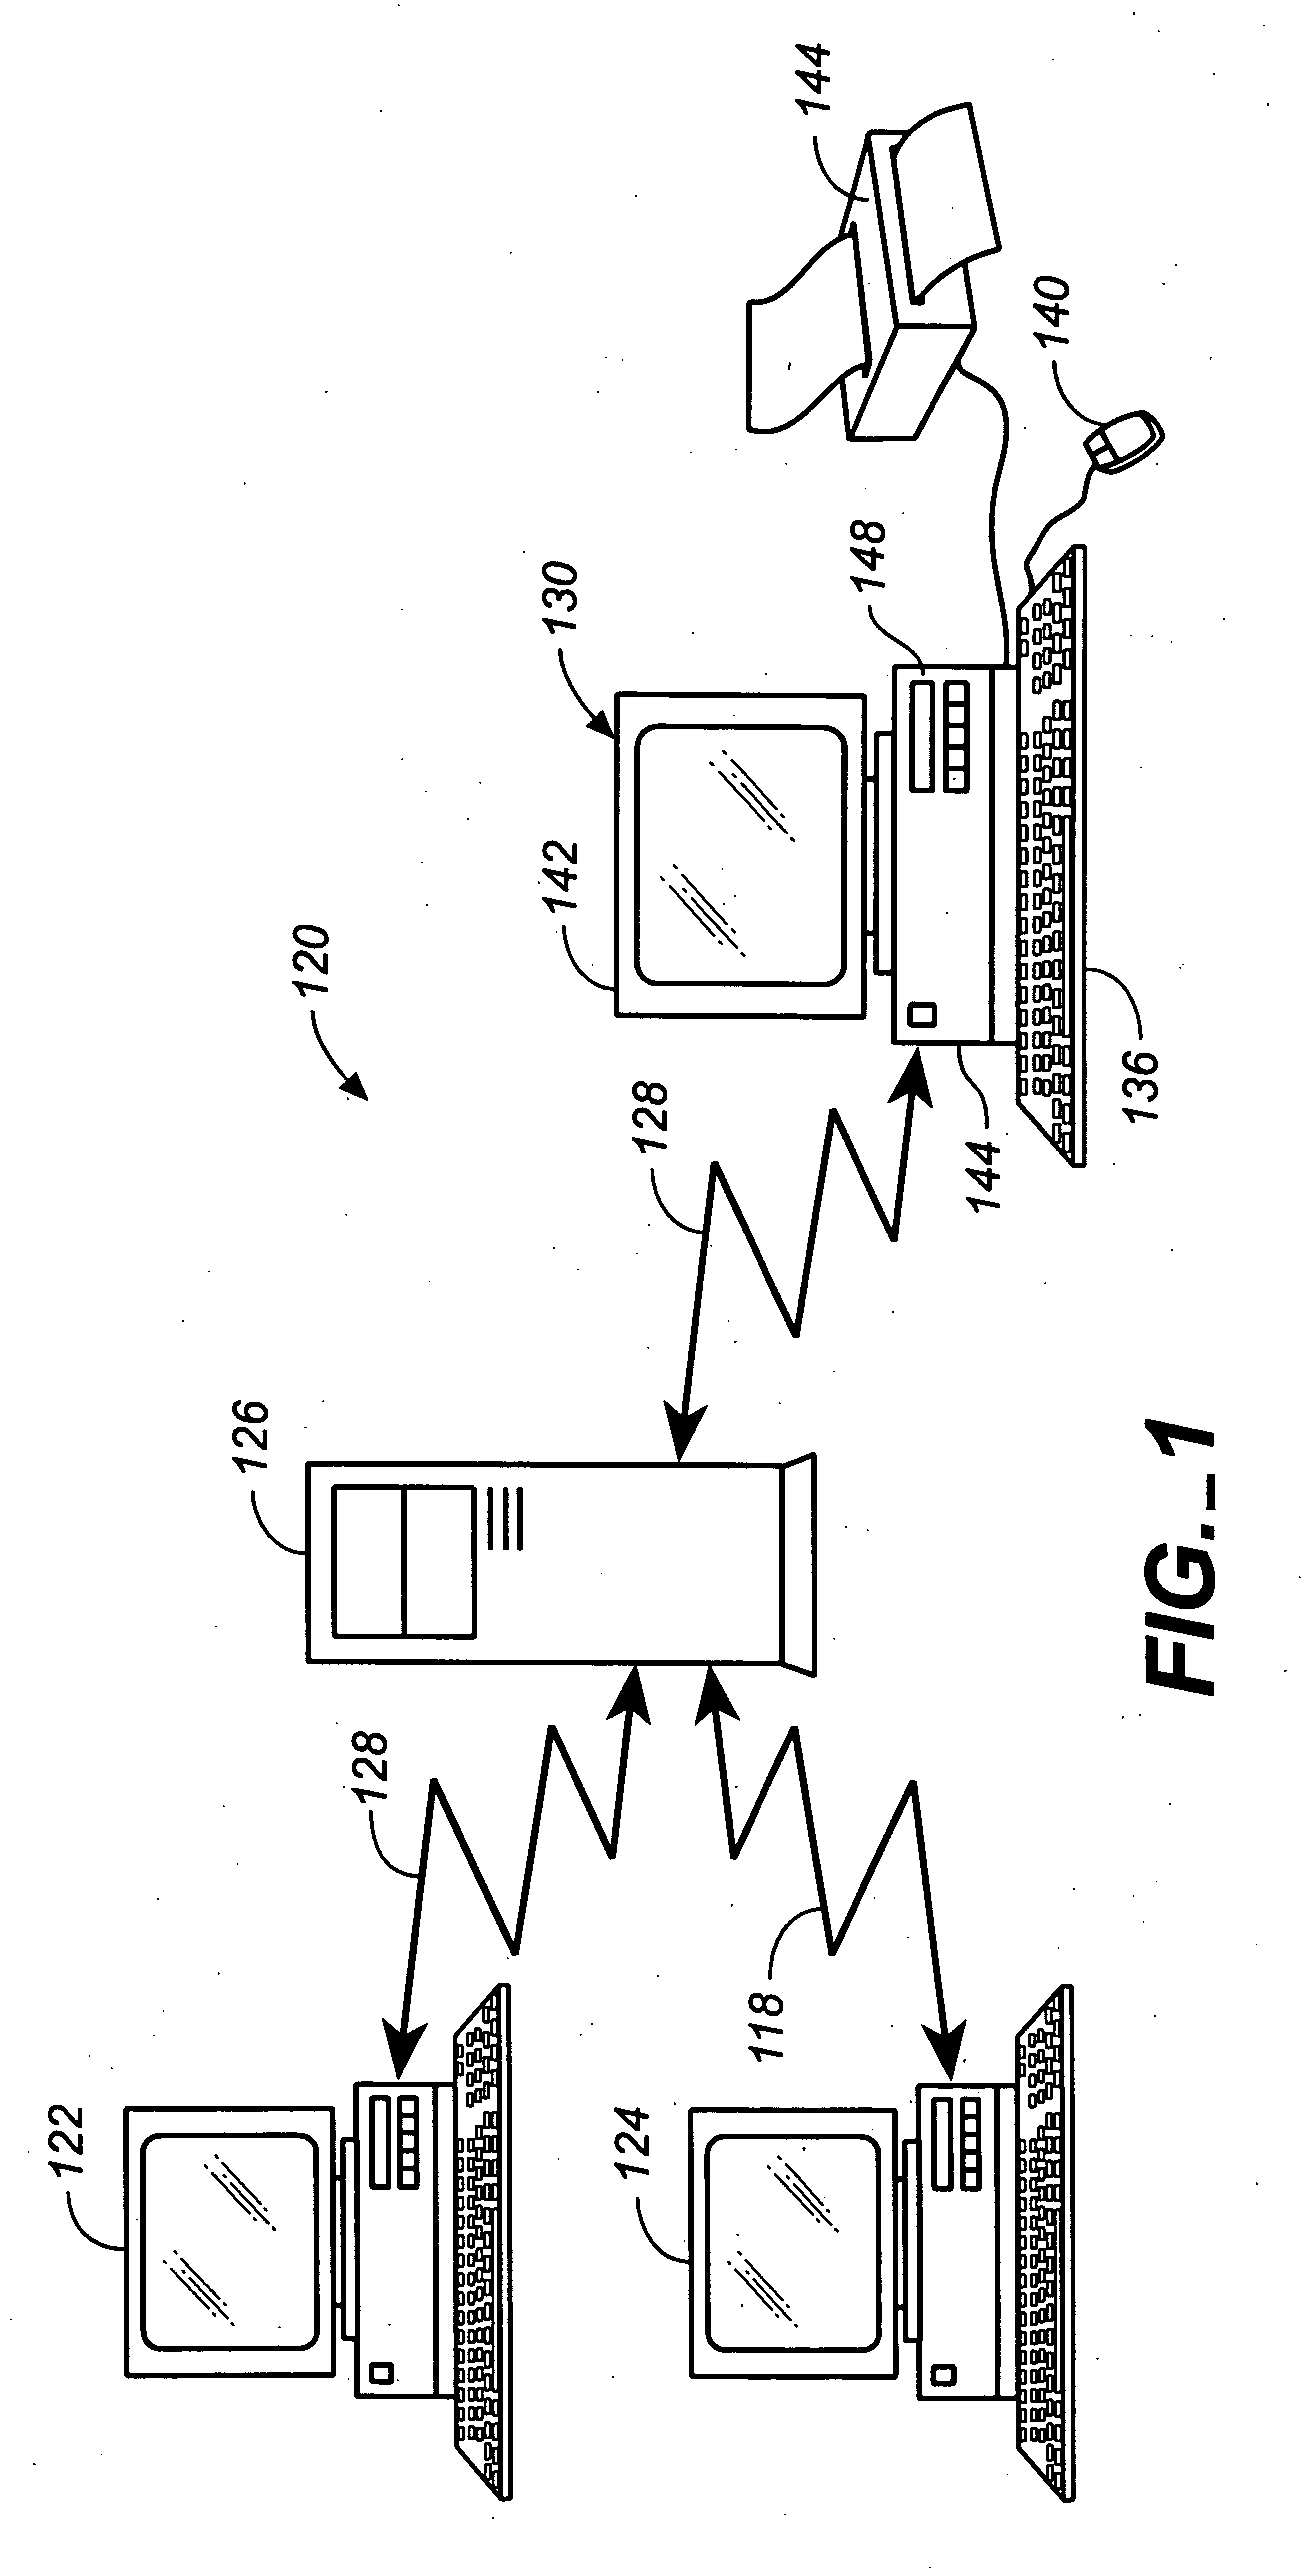 Power mesh for multiple frequency operation of semiconductor products